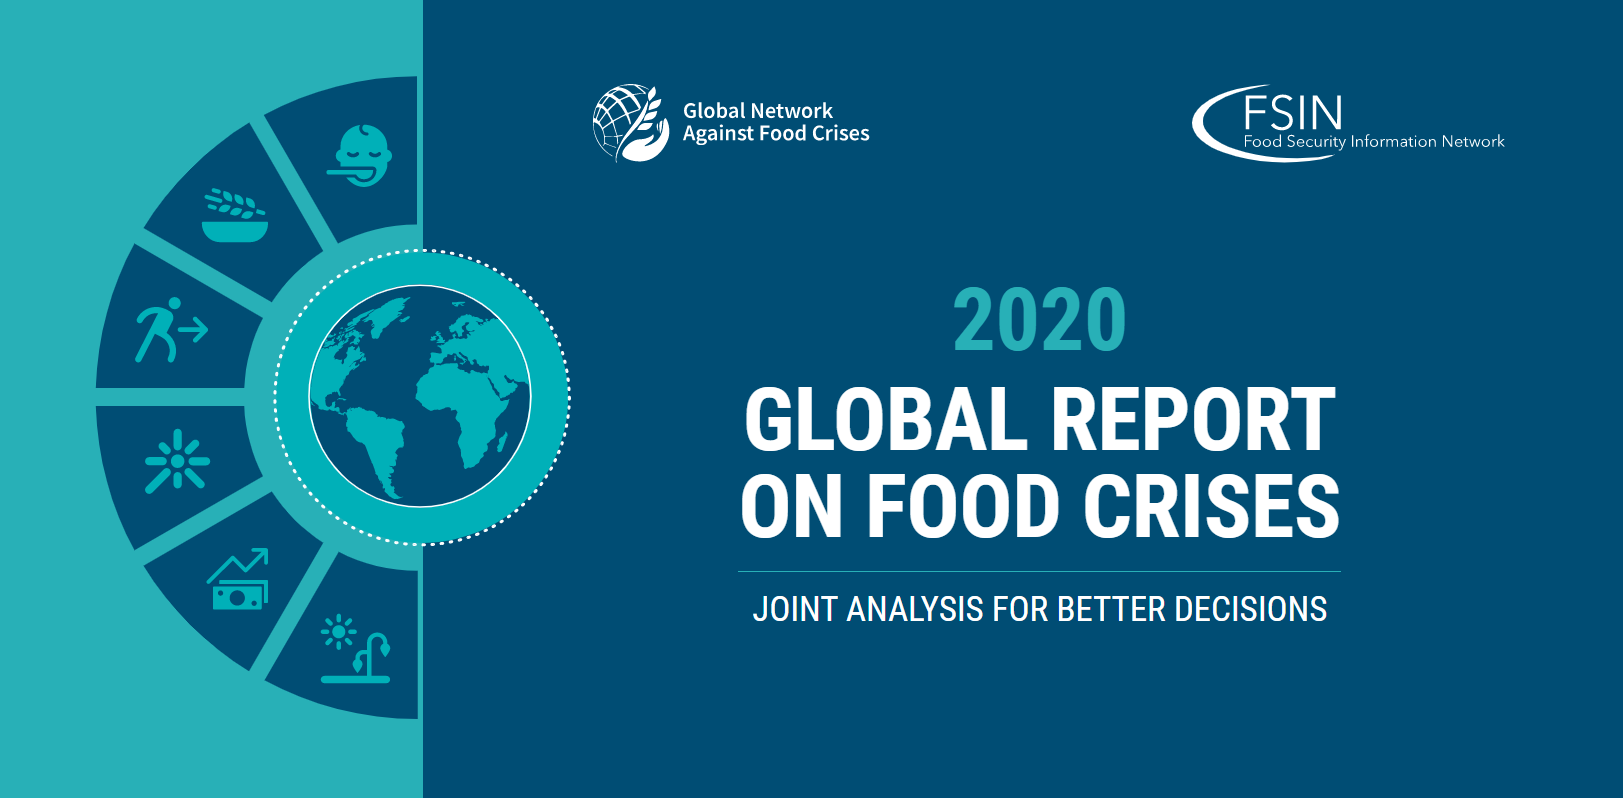 Global Report on Food Crises reveals scope of food crises as COVID-19 poses new risks to vulnerable countries